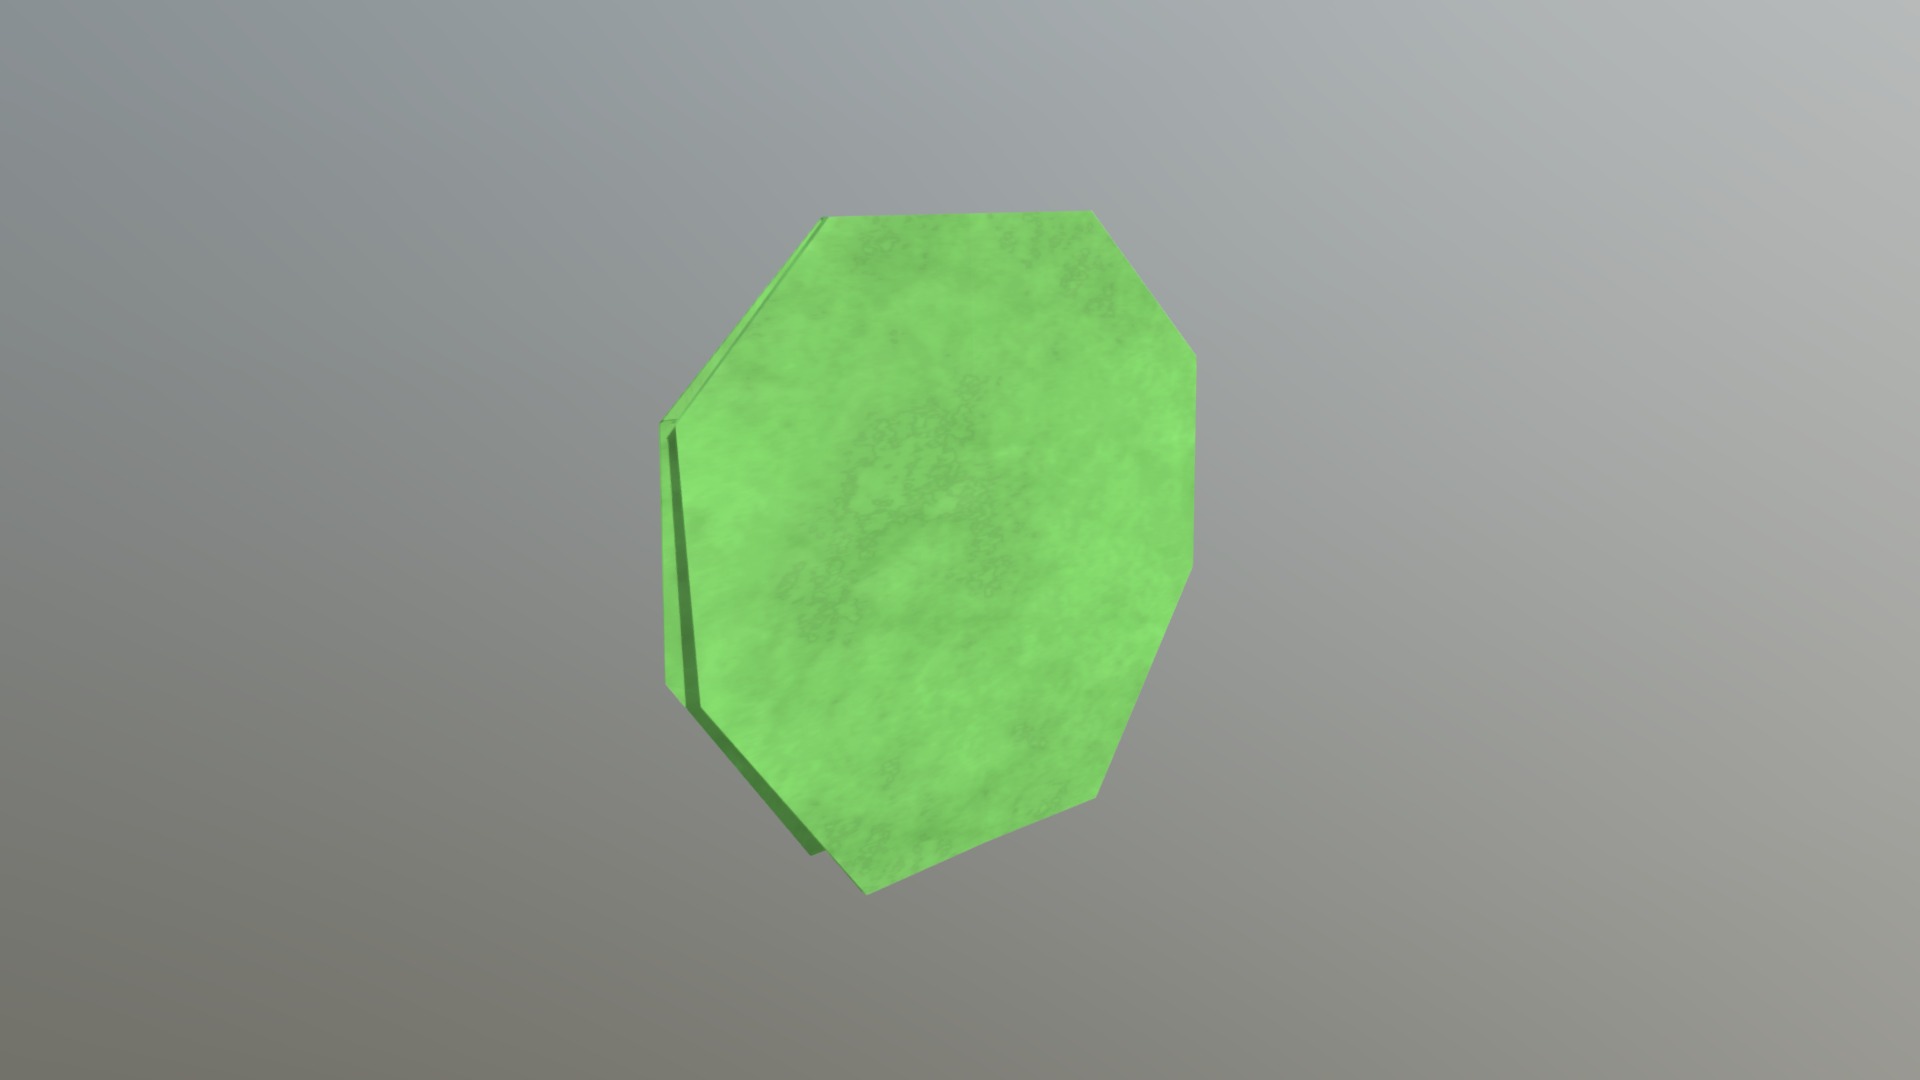 3D model Origami Bush - This is a 3D model of the Origami Bush. The 3D model is about a green square with a white background.